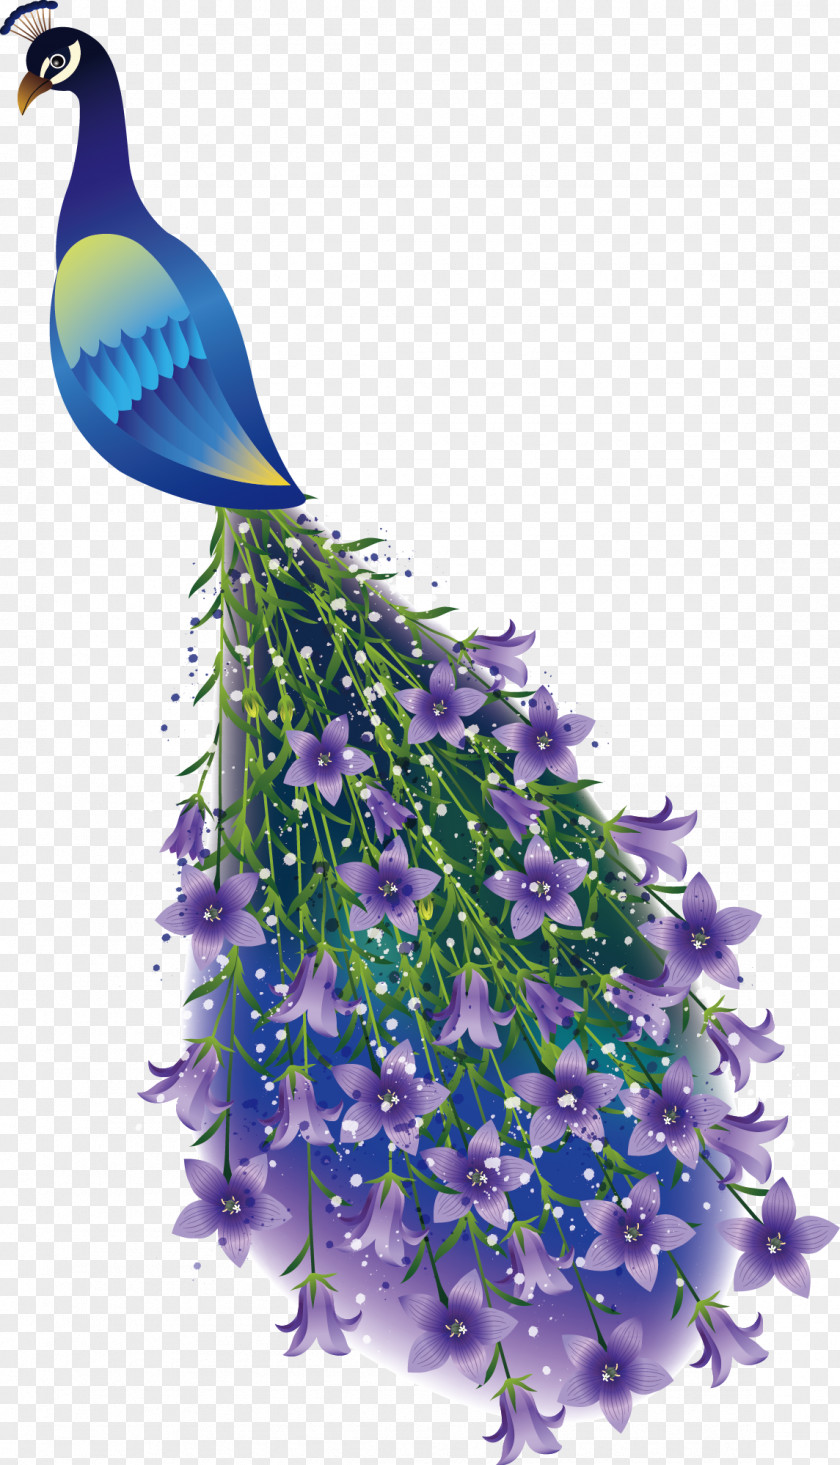 Peacock Peafowl Branch Drawing Illustration PNG